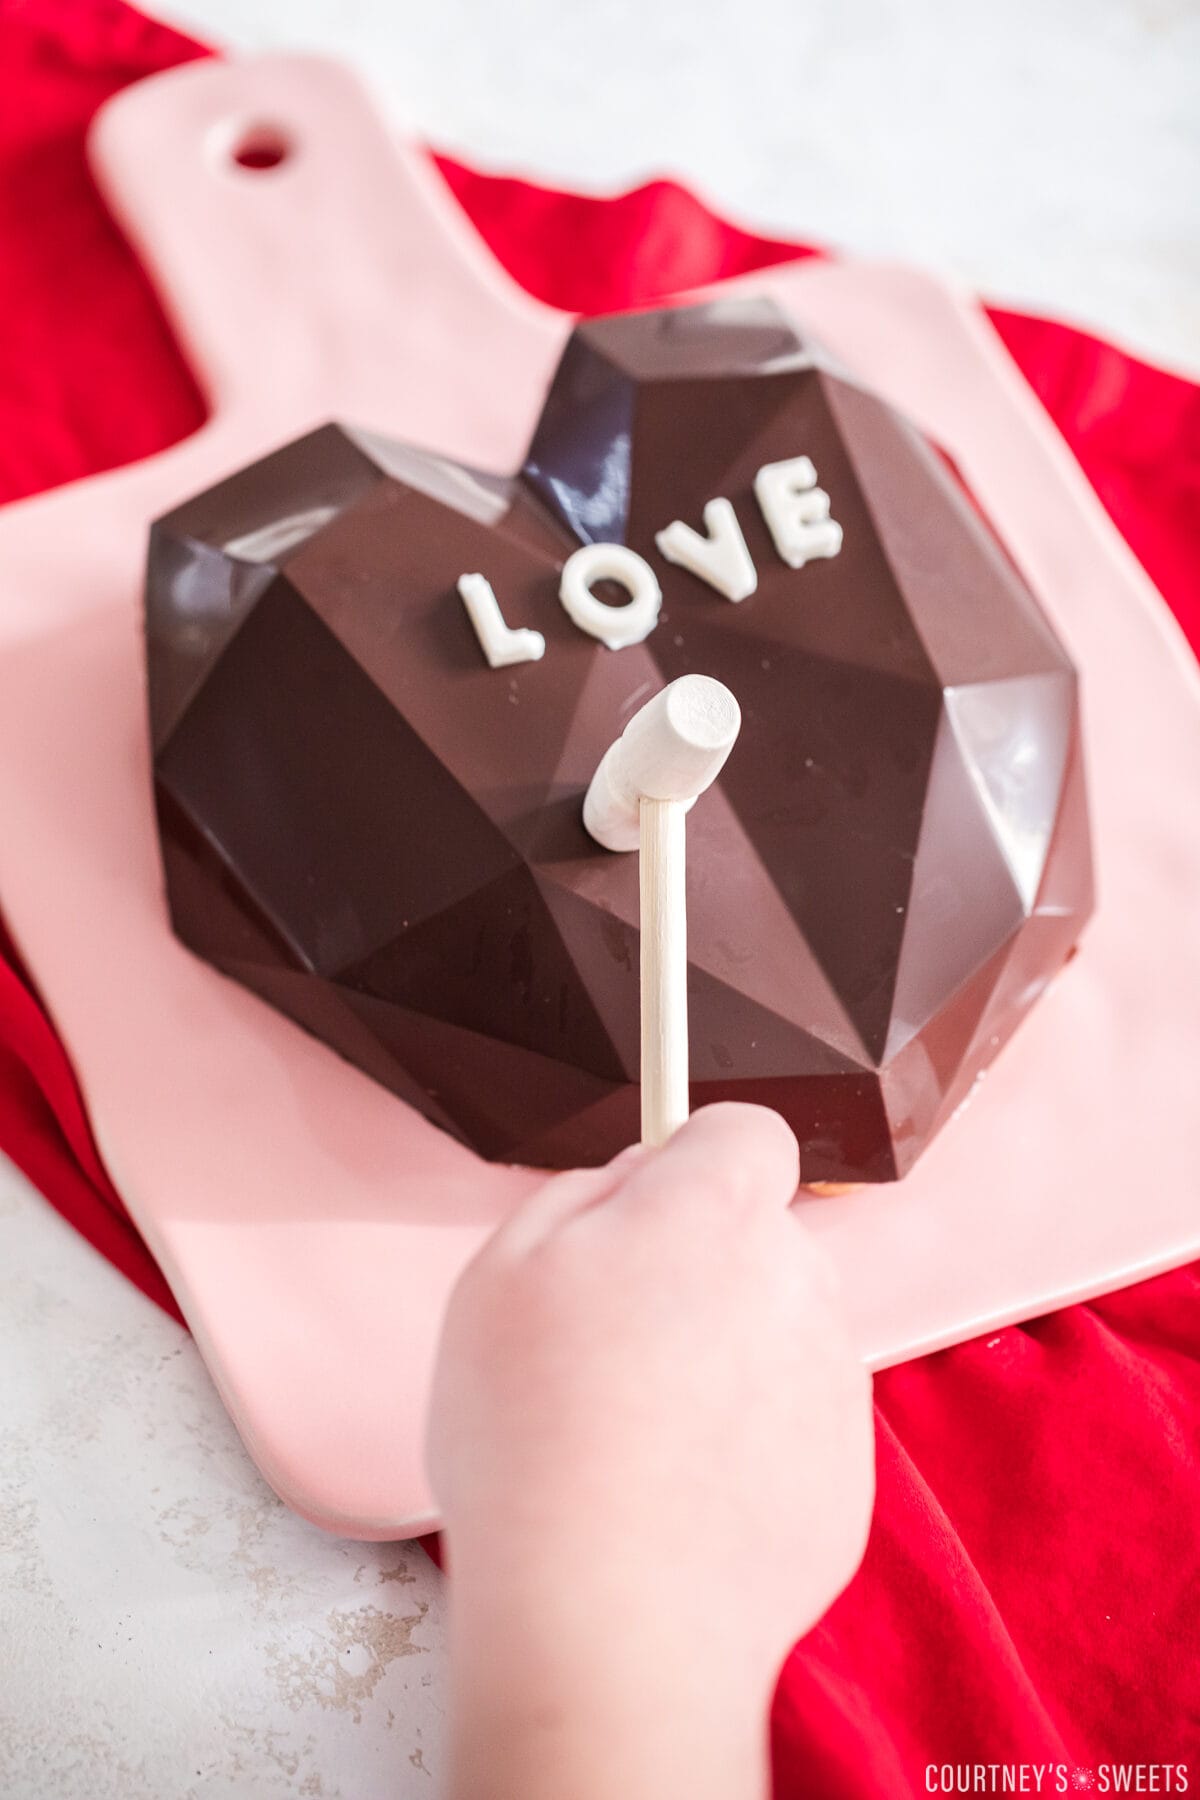 hand holding small wooden hammer over breakable chocolate heart.